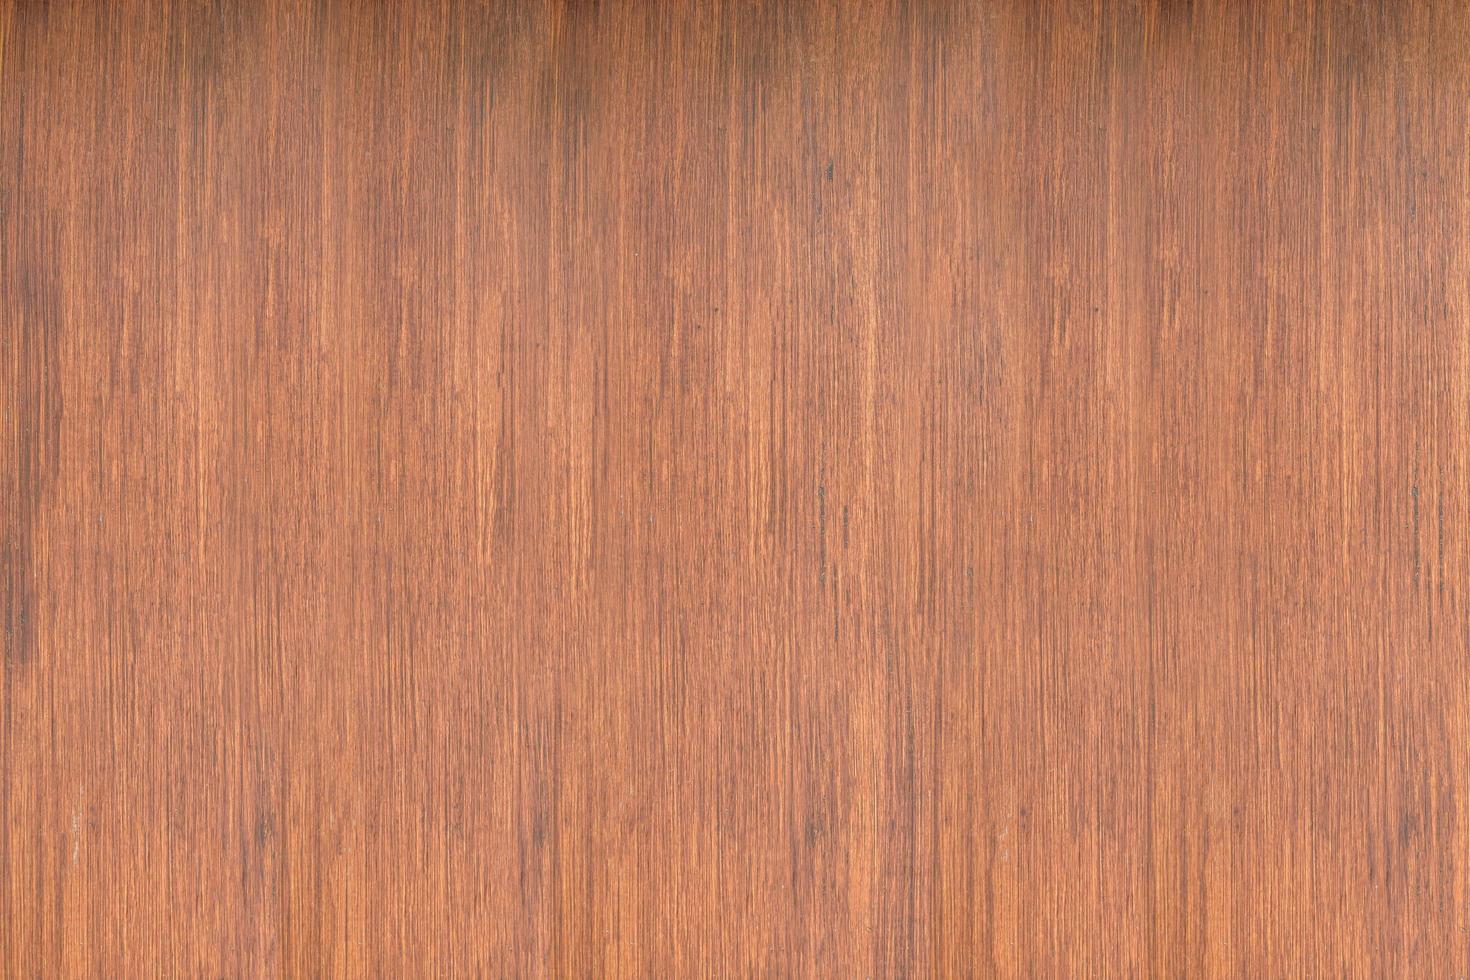 Wood texture background for design and decoration photo